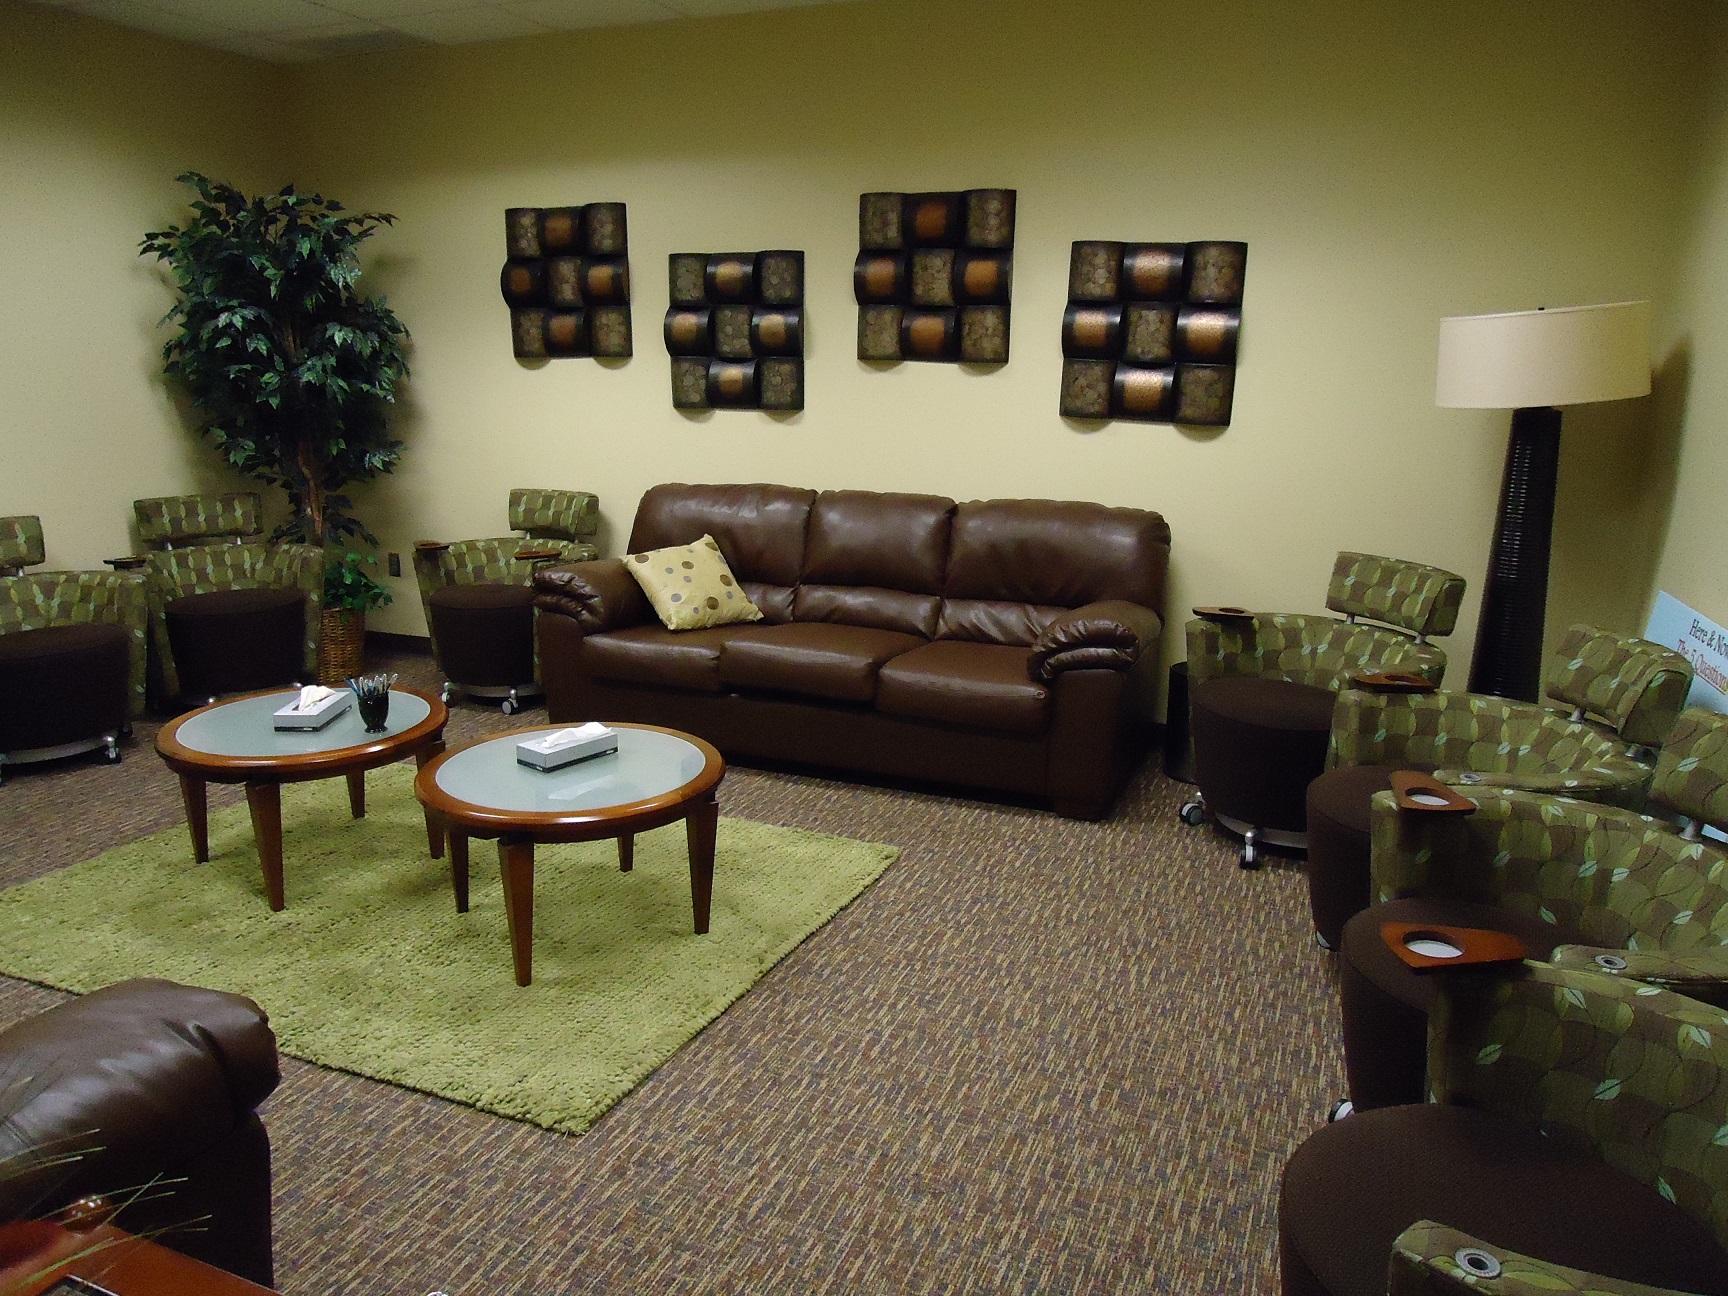 Counseling center study area